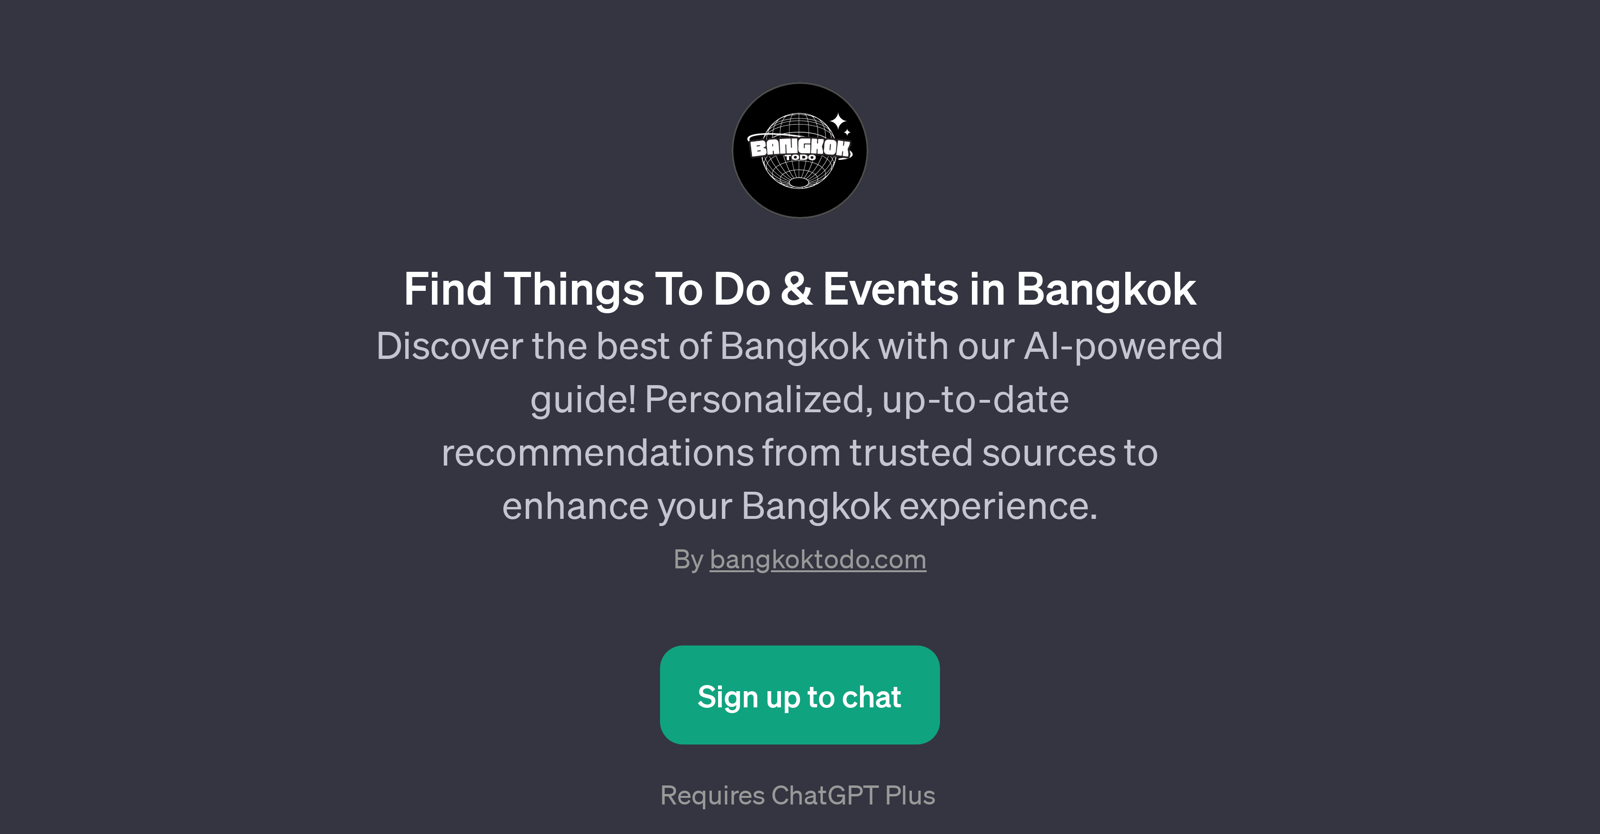 Find Things To Do & Events in Bangkok website